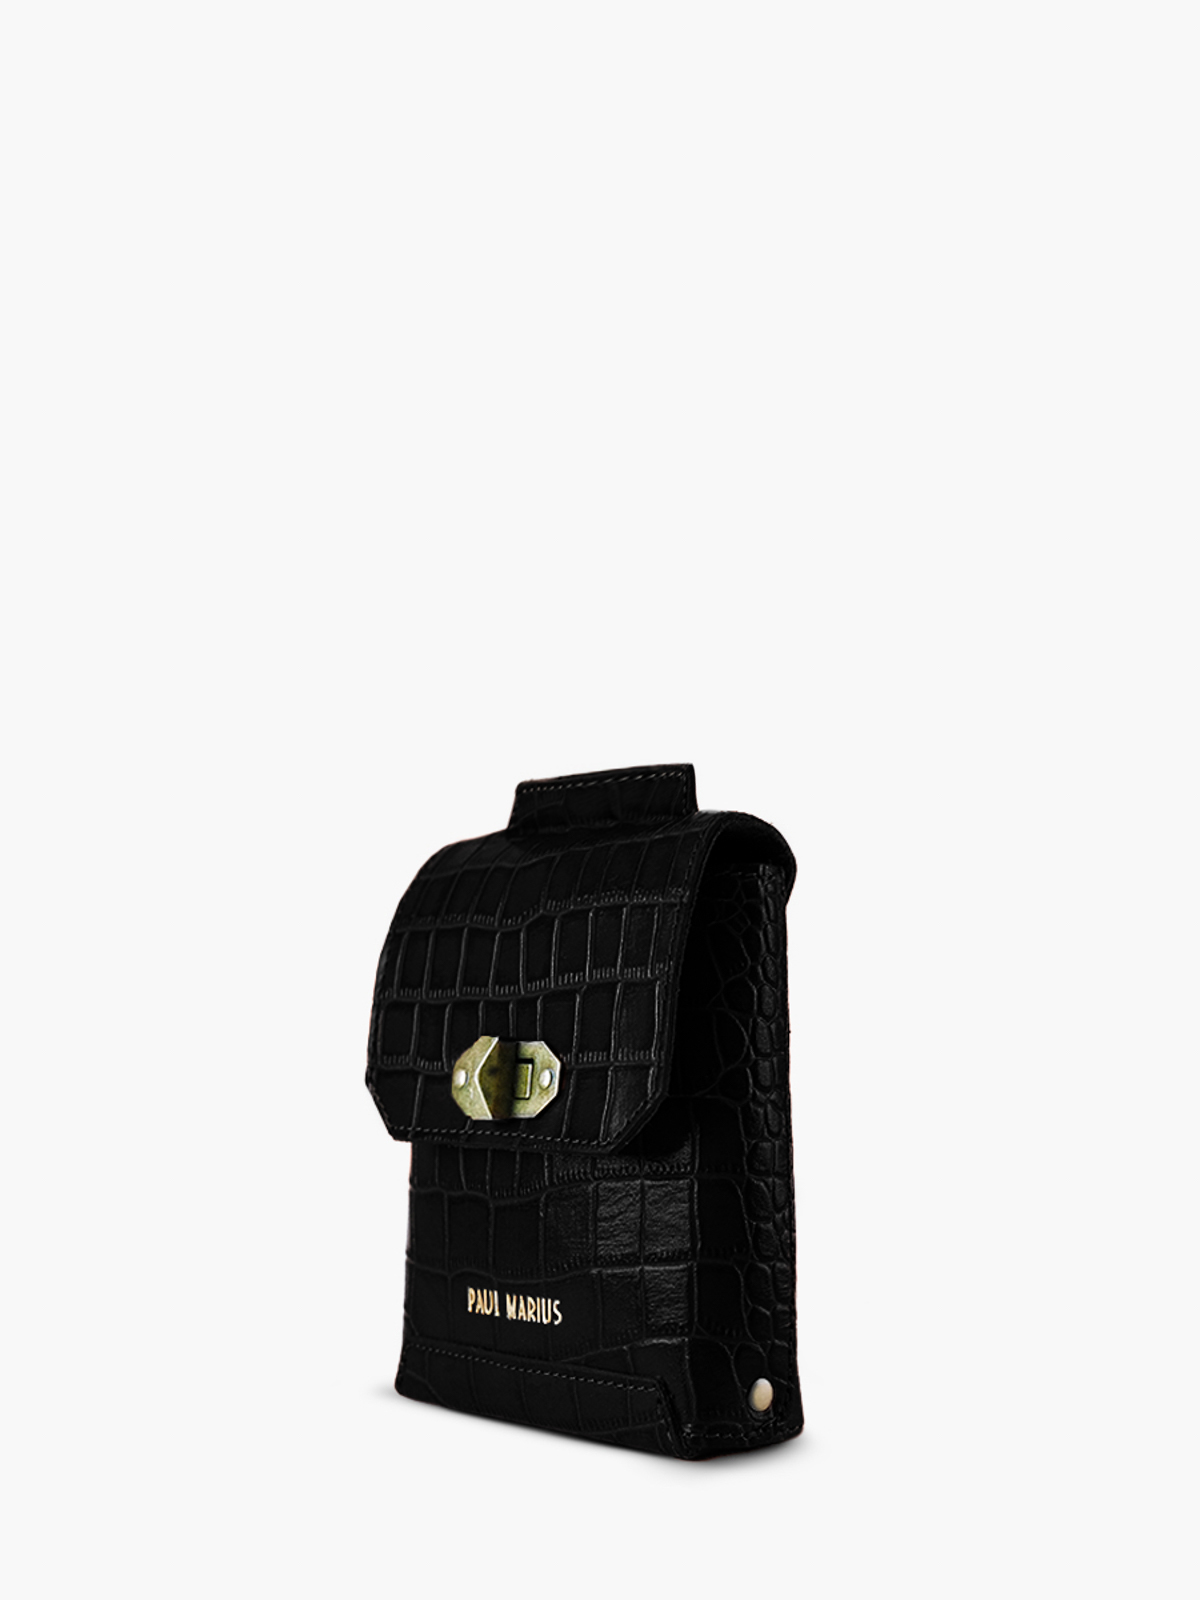 leather-phone-bag-for-woman-black-side-view-picture-agathe-alligator-jet-black-paul-marius-3760125357454